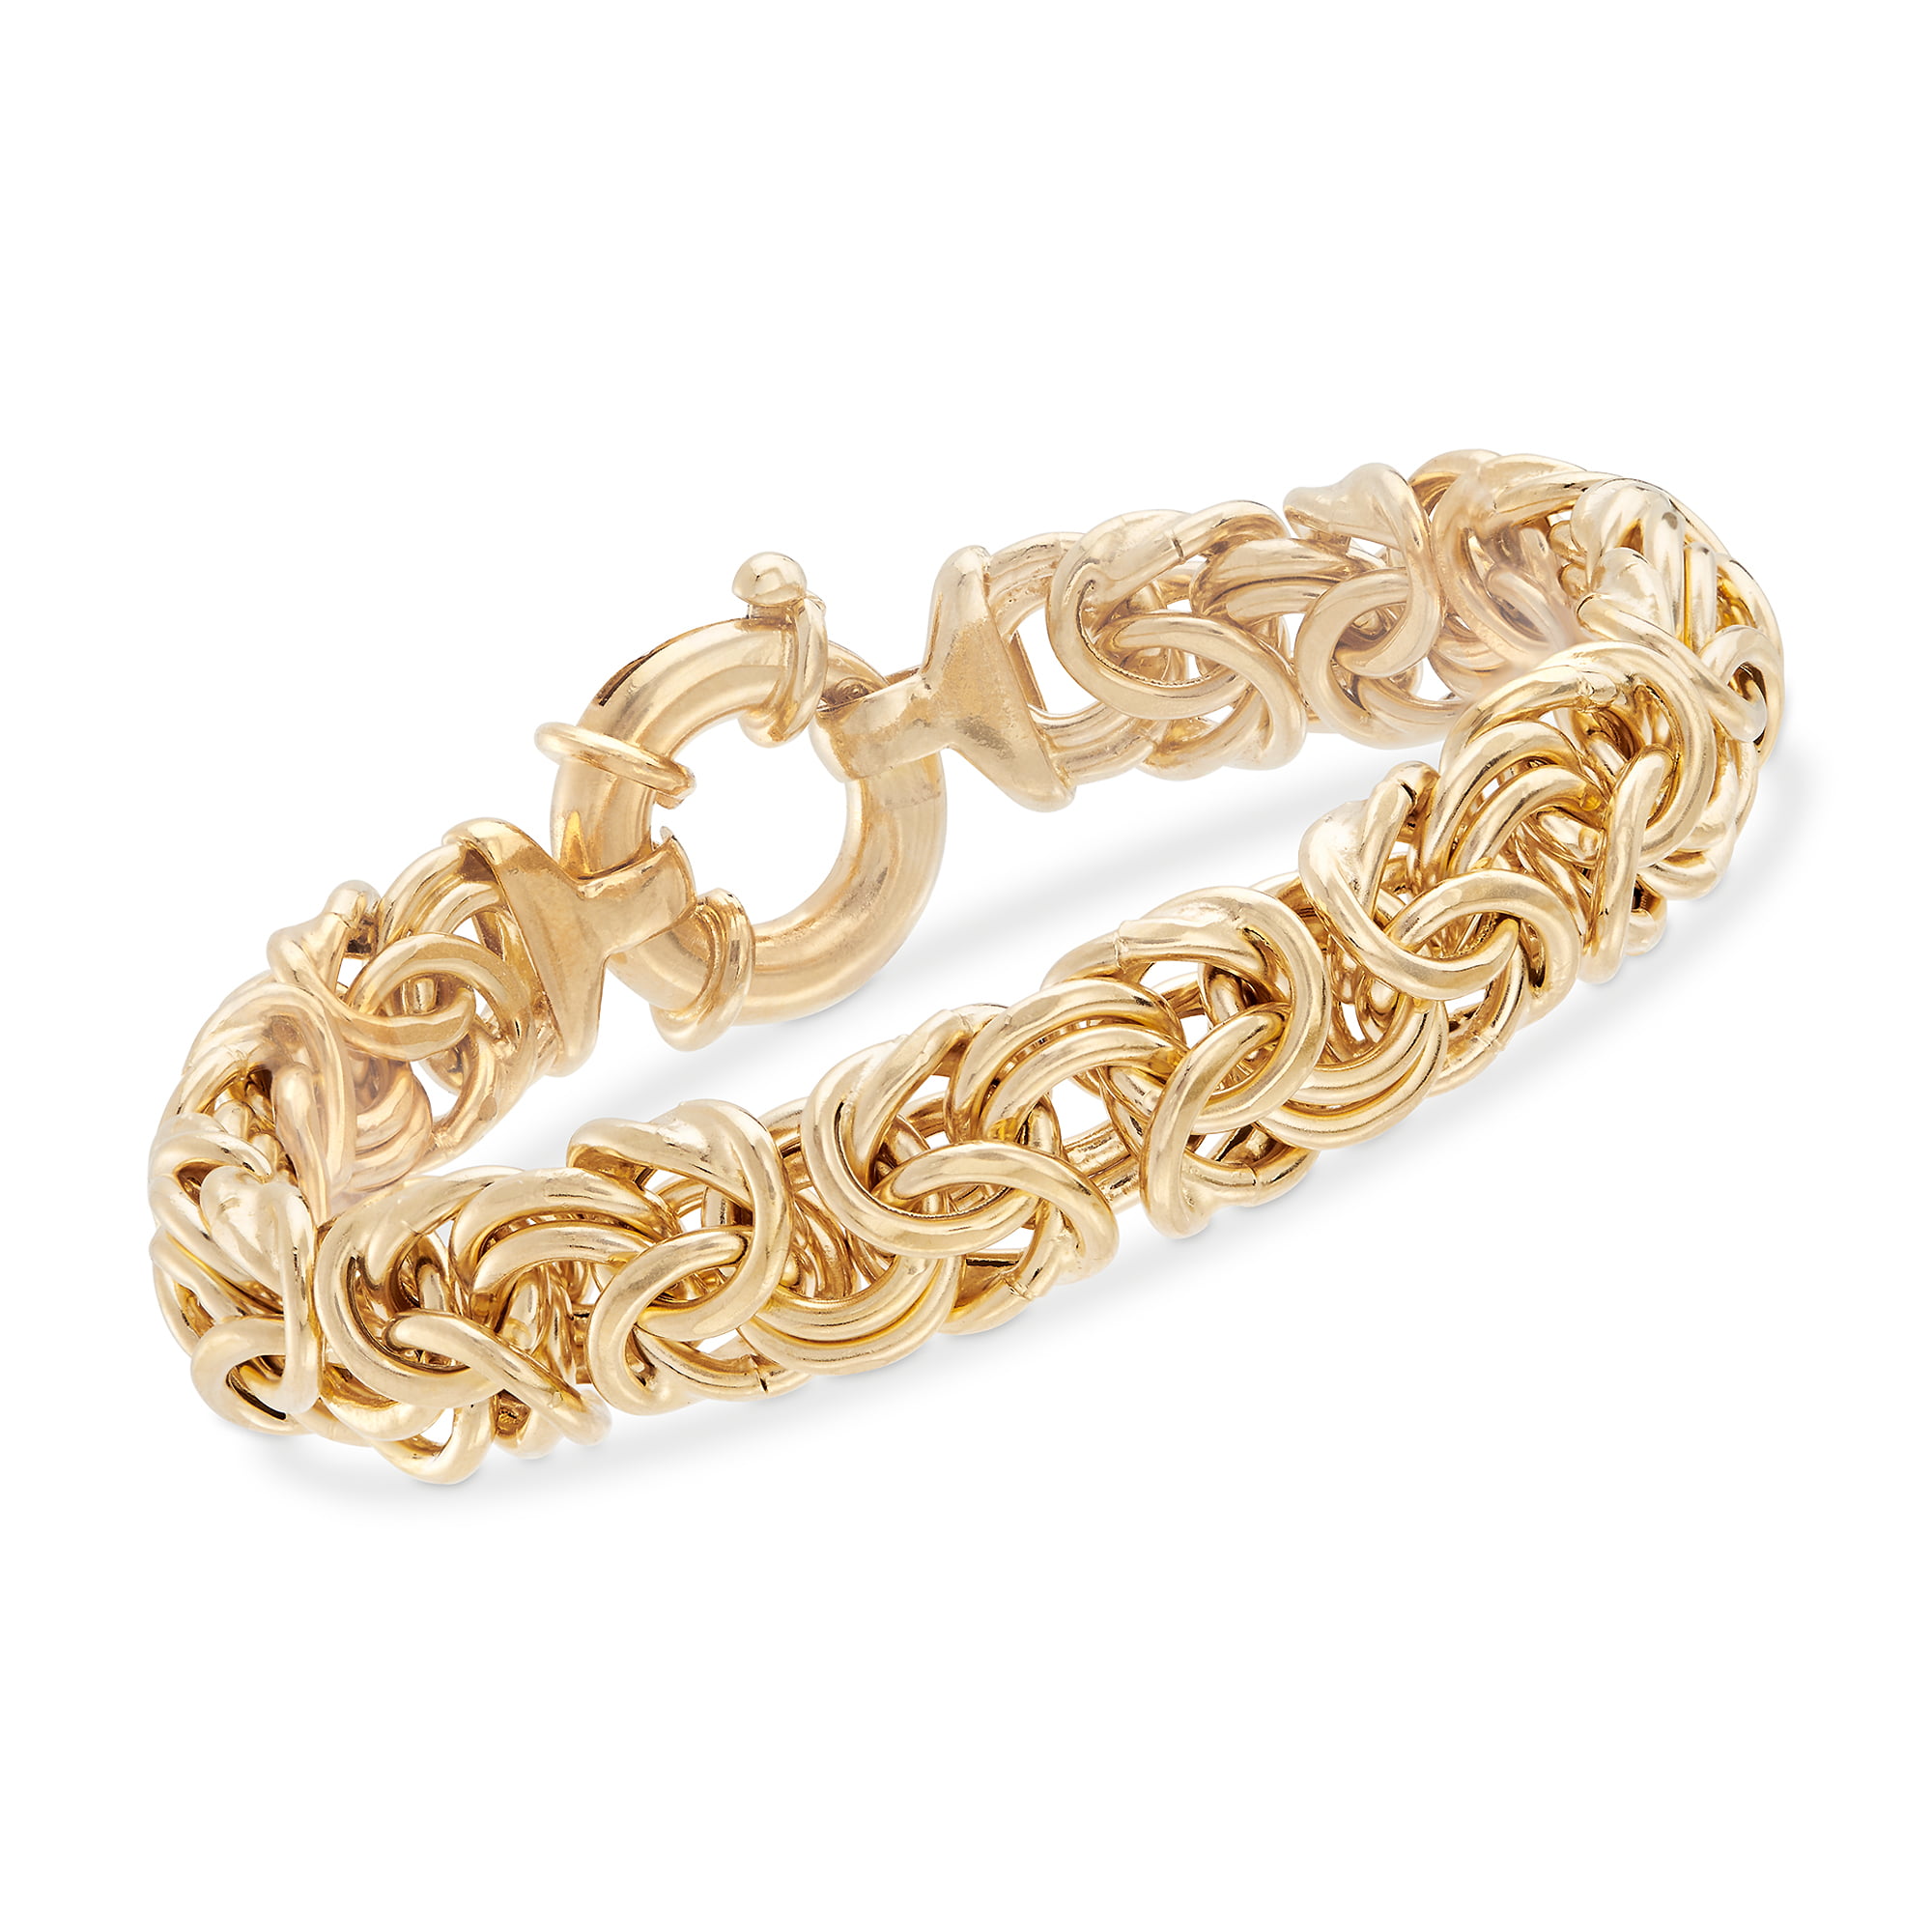 Made in Italy Designs by Helen Andrews 18k Gold Over Sterling Silver Round Cut Byzantine 7 Wrapped Sect Bracelet 7.5 